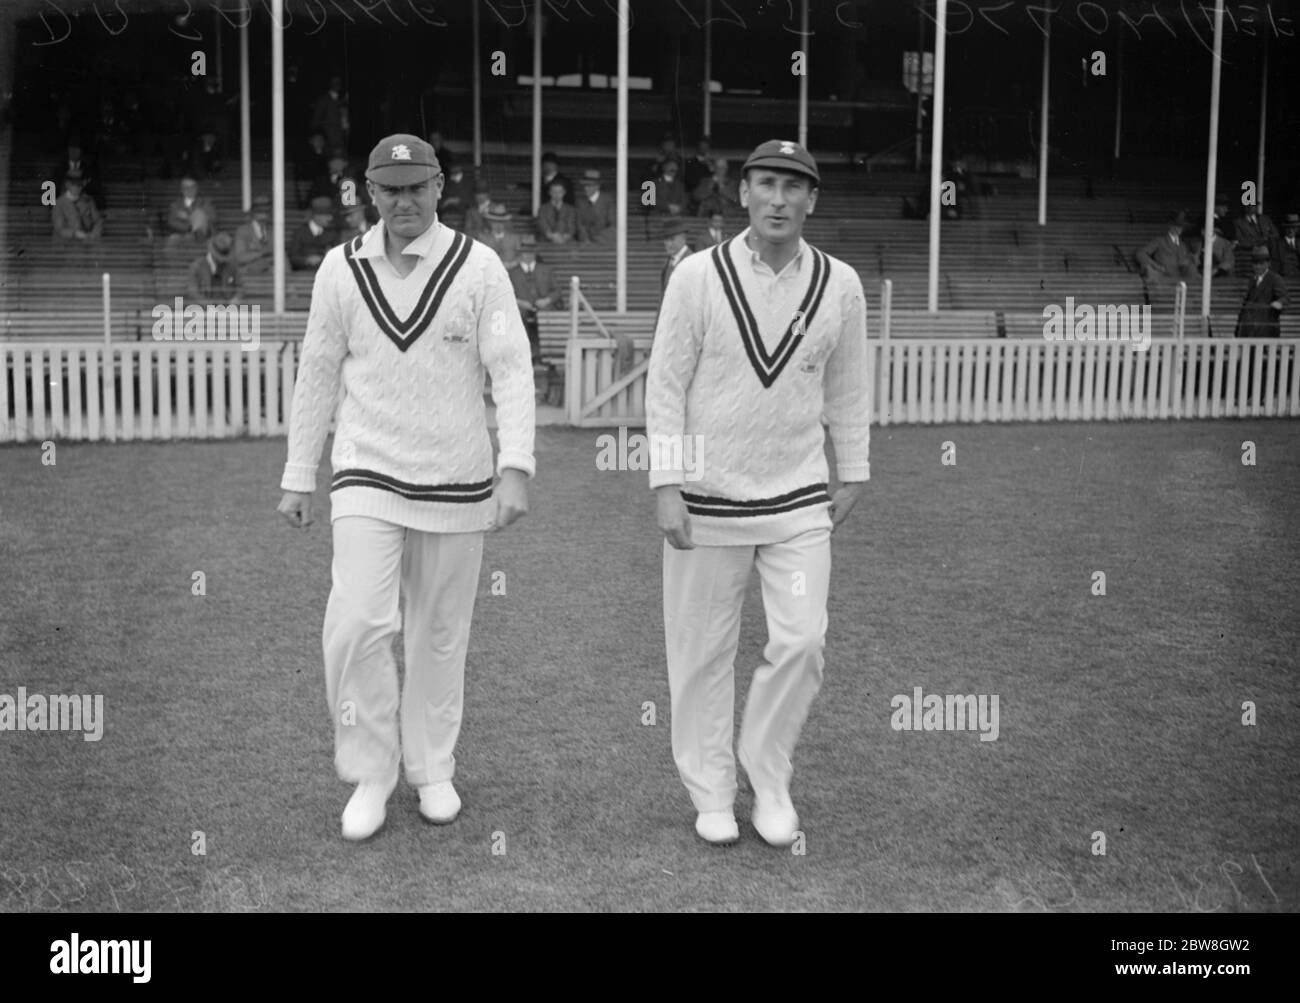 England 's new cricket Captain takes the field . D R Jardine , and M J C Allom ( left ) taking the field for the Gentlemen against the players in the match at the Oval . 11 June 1931 Stock Photo